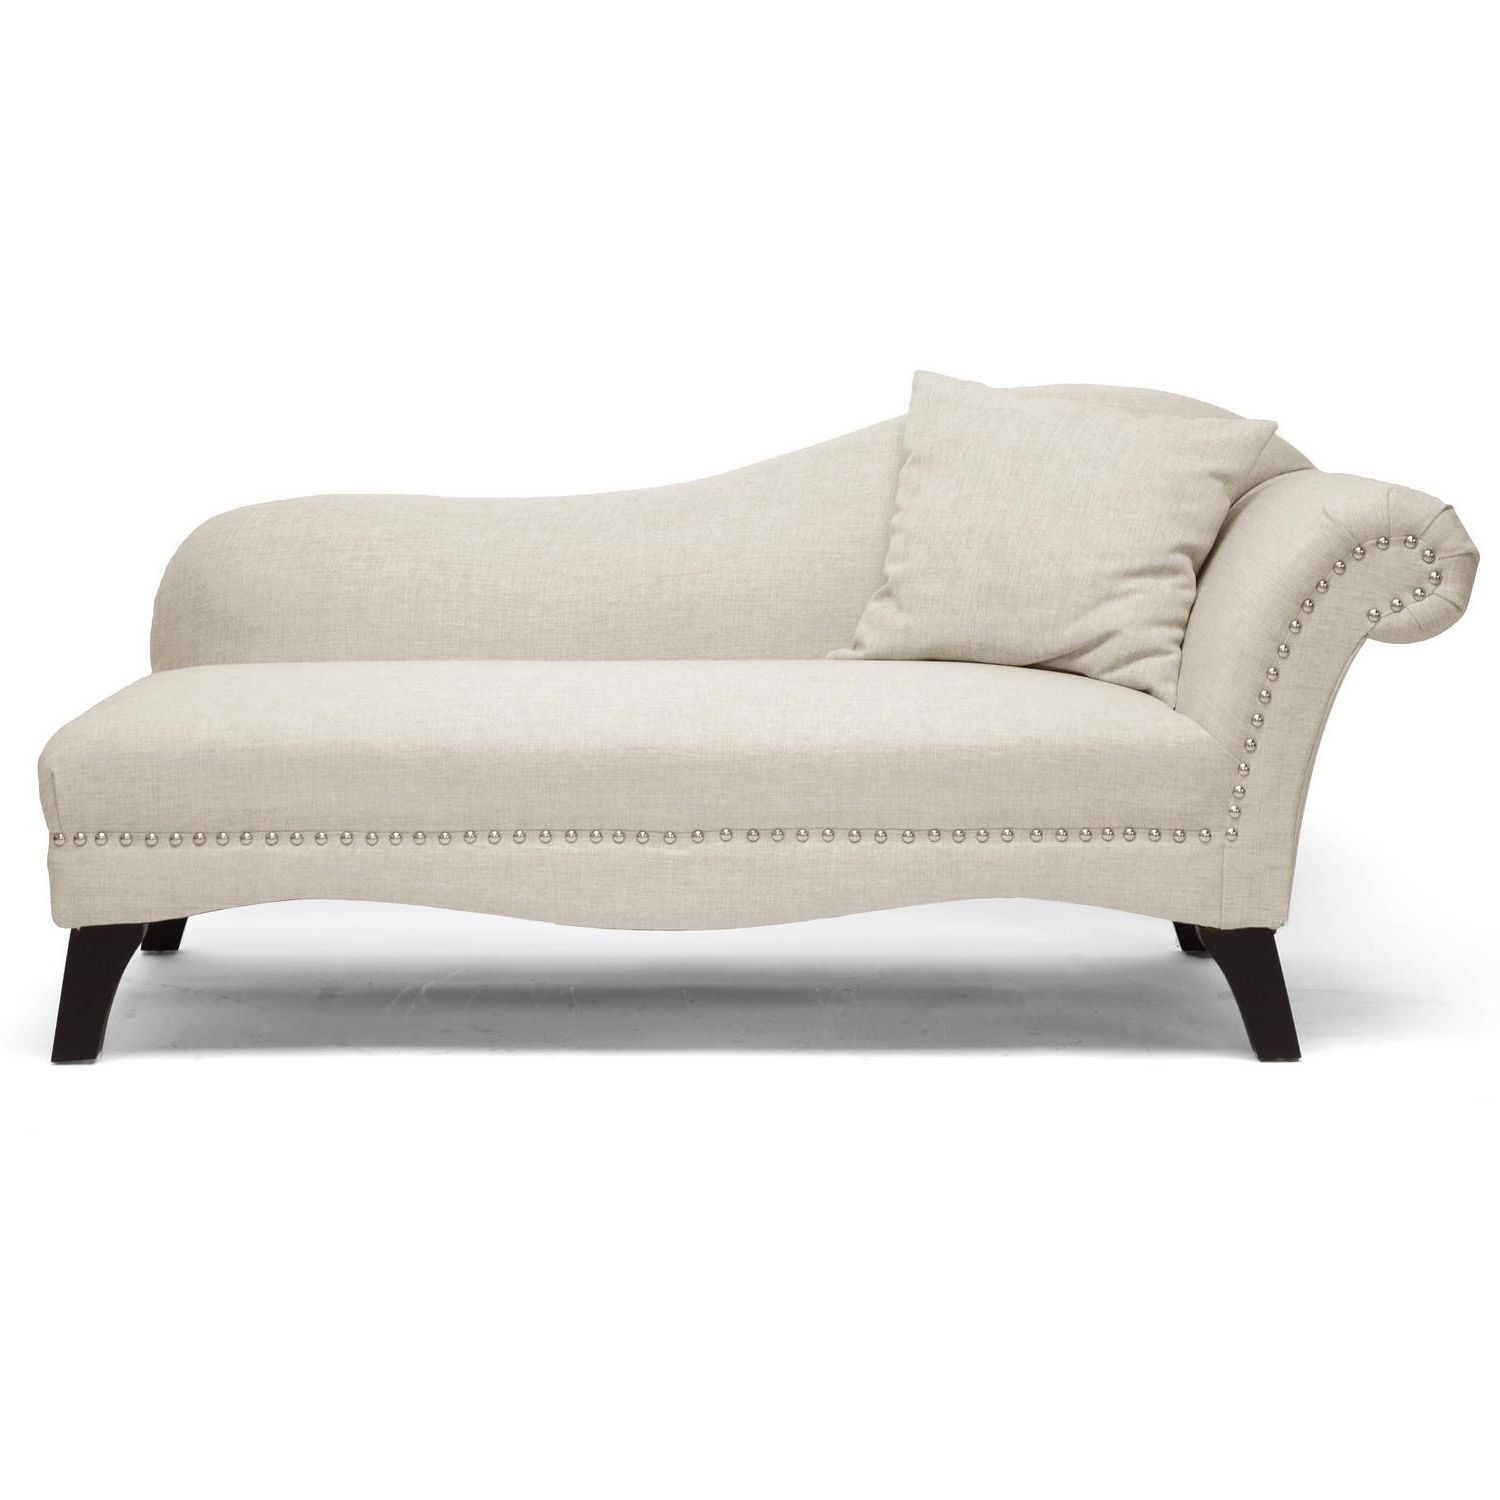 Well Known Chaise Lounges With Arms With Regard To Chaise Lounges – Walmart (Photo 1 of 15)